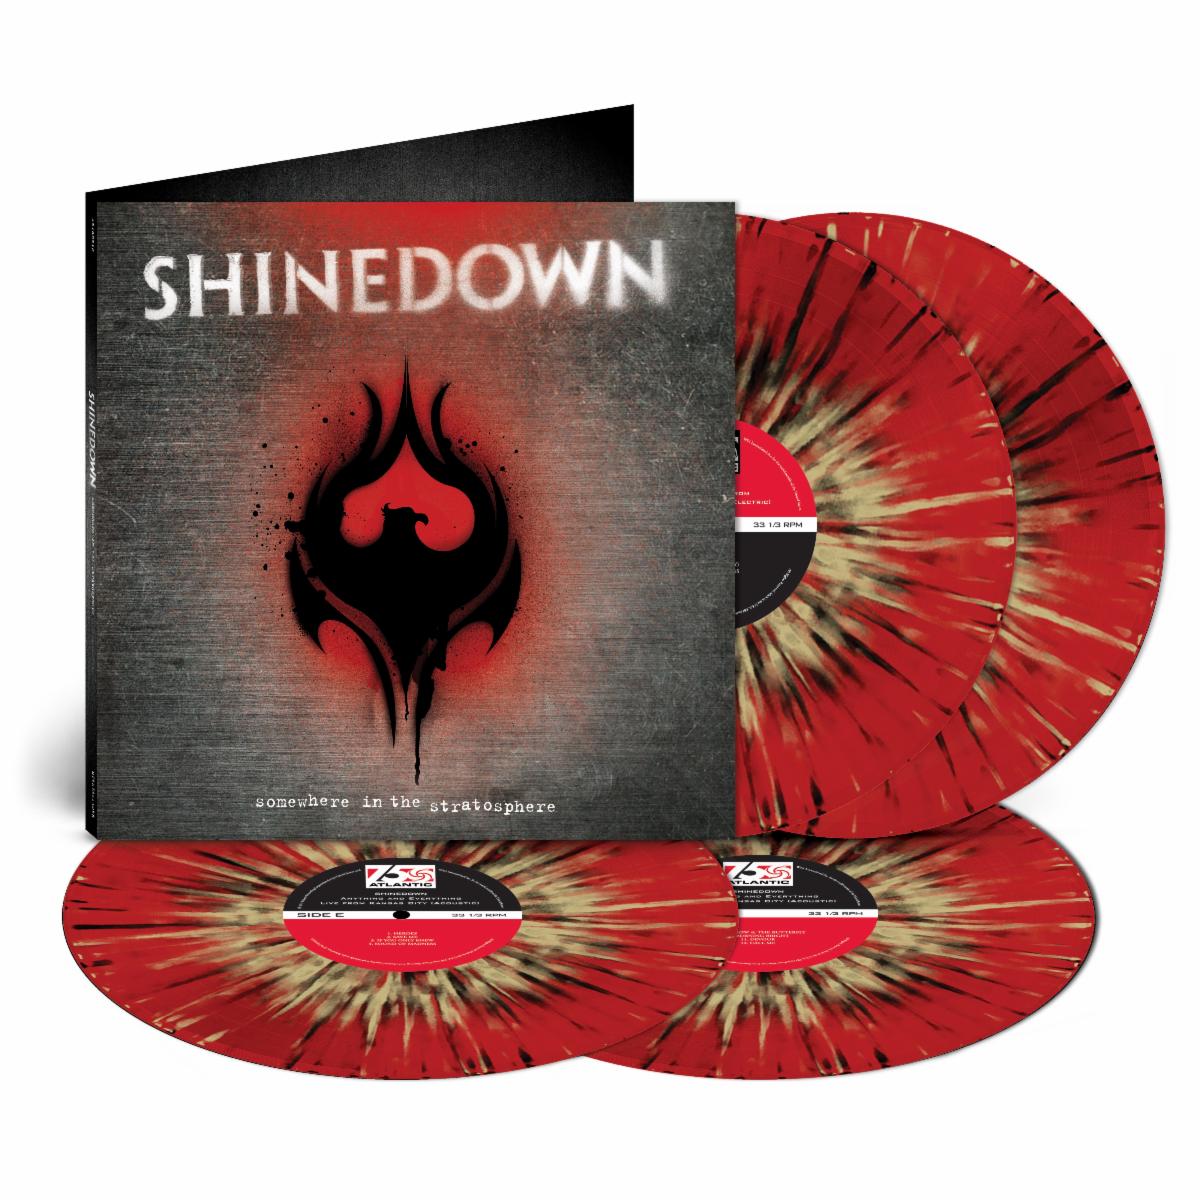 Shinedown Announces 2011 Live Album 'Somewhere In The Stratosphere' To Be Released on Vinyl